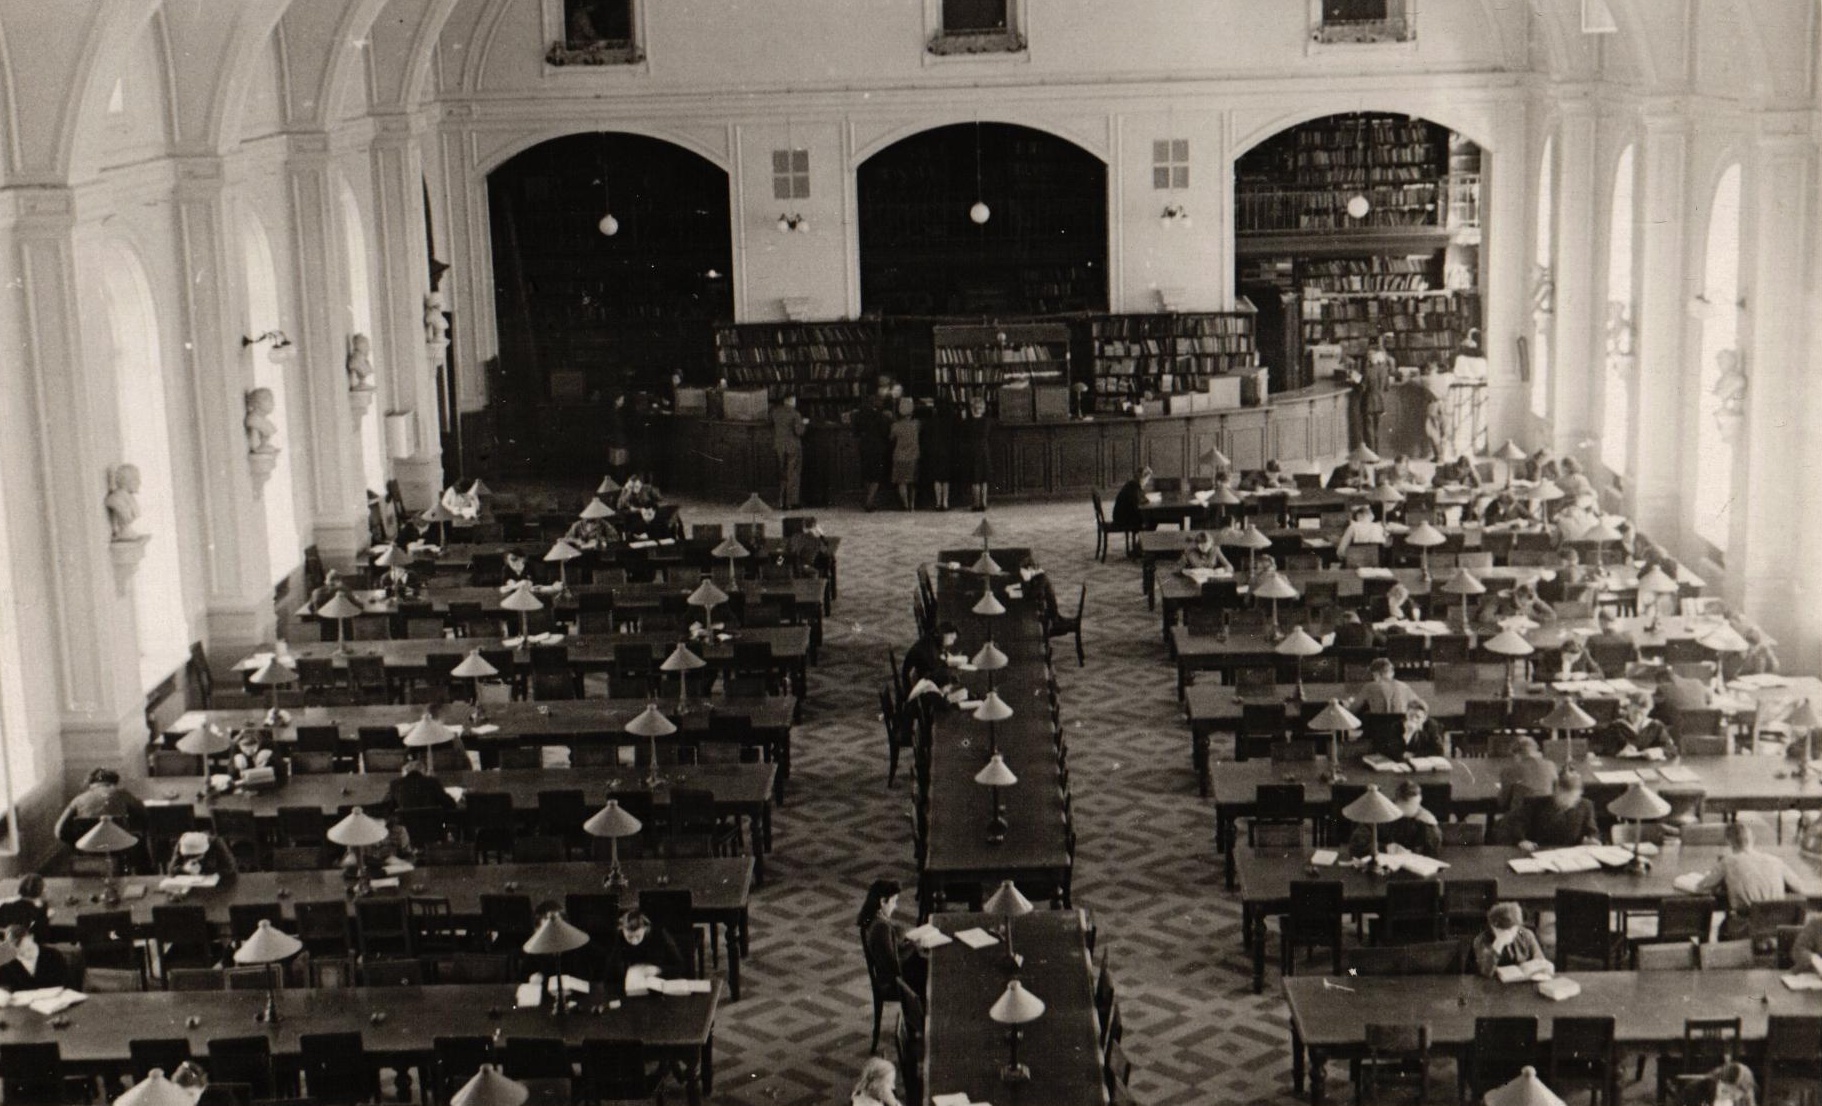 General Reading Room. 1930s